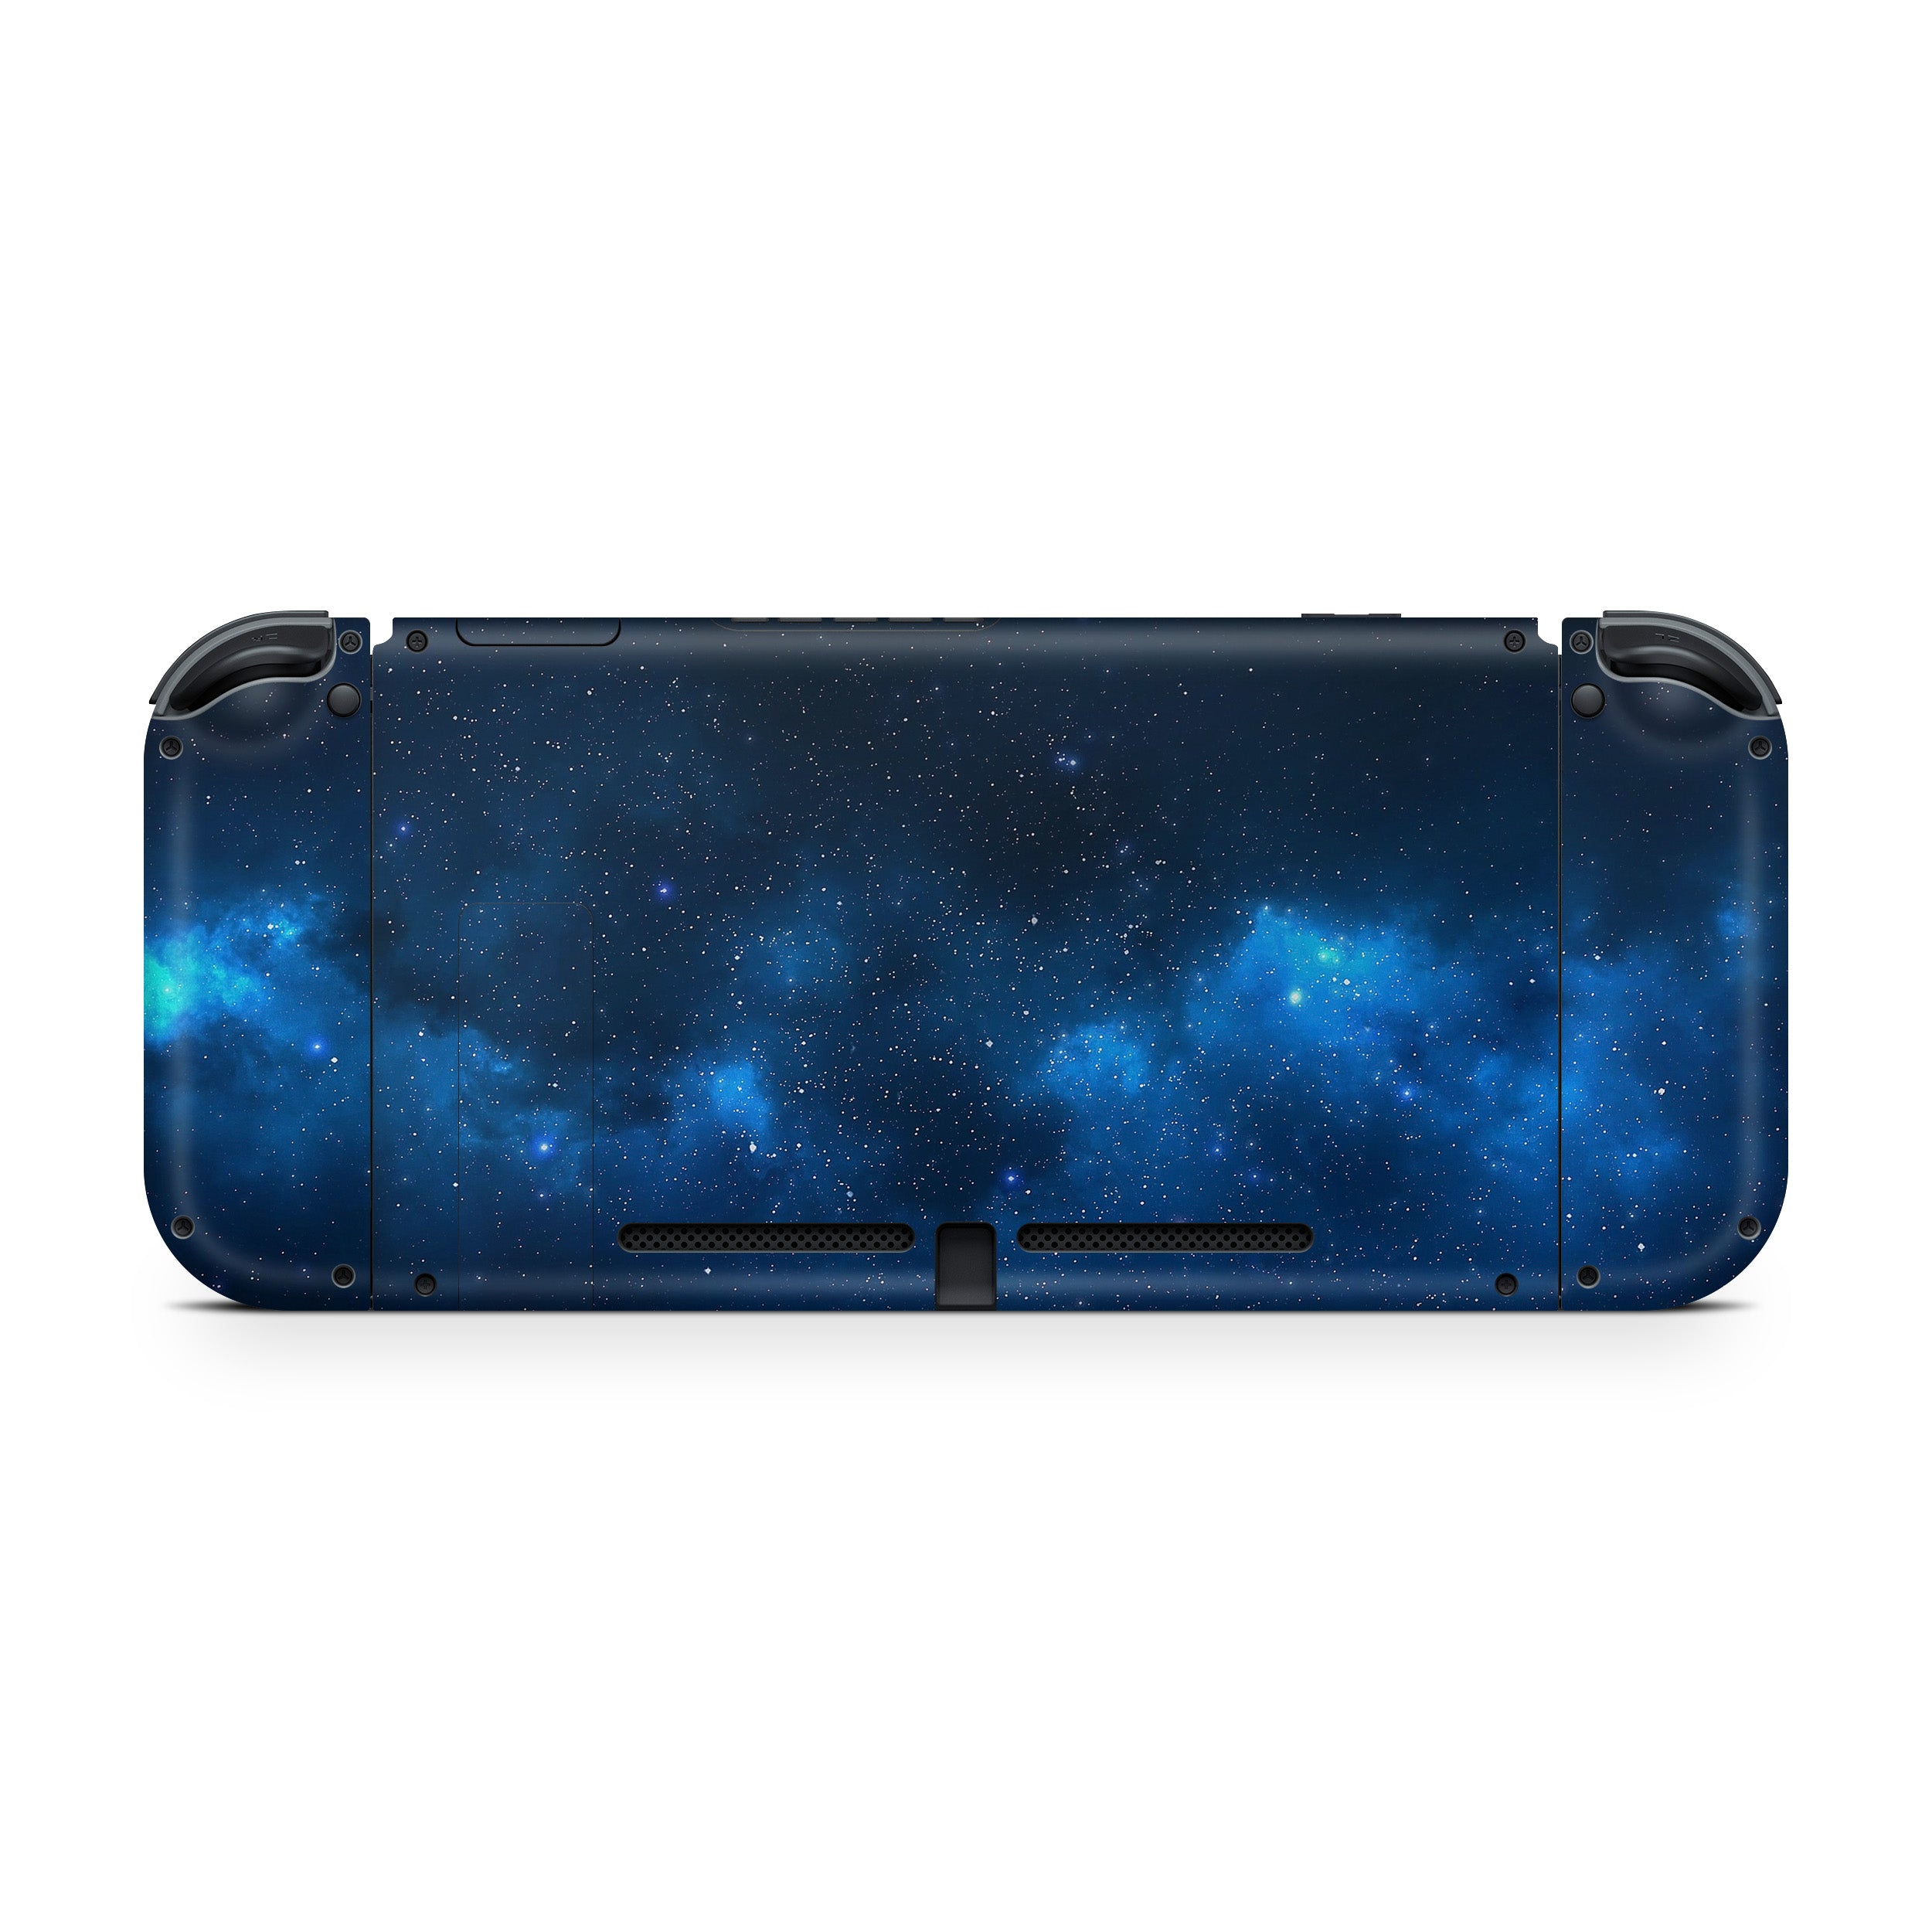 A video game skin featuring a Space design for the Nintendo Switch.